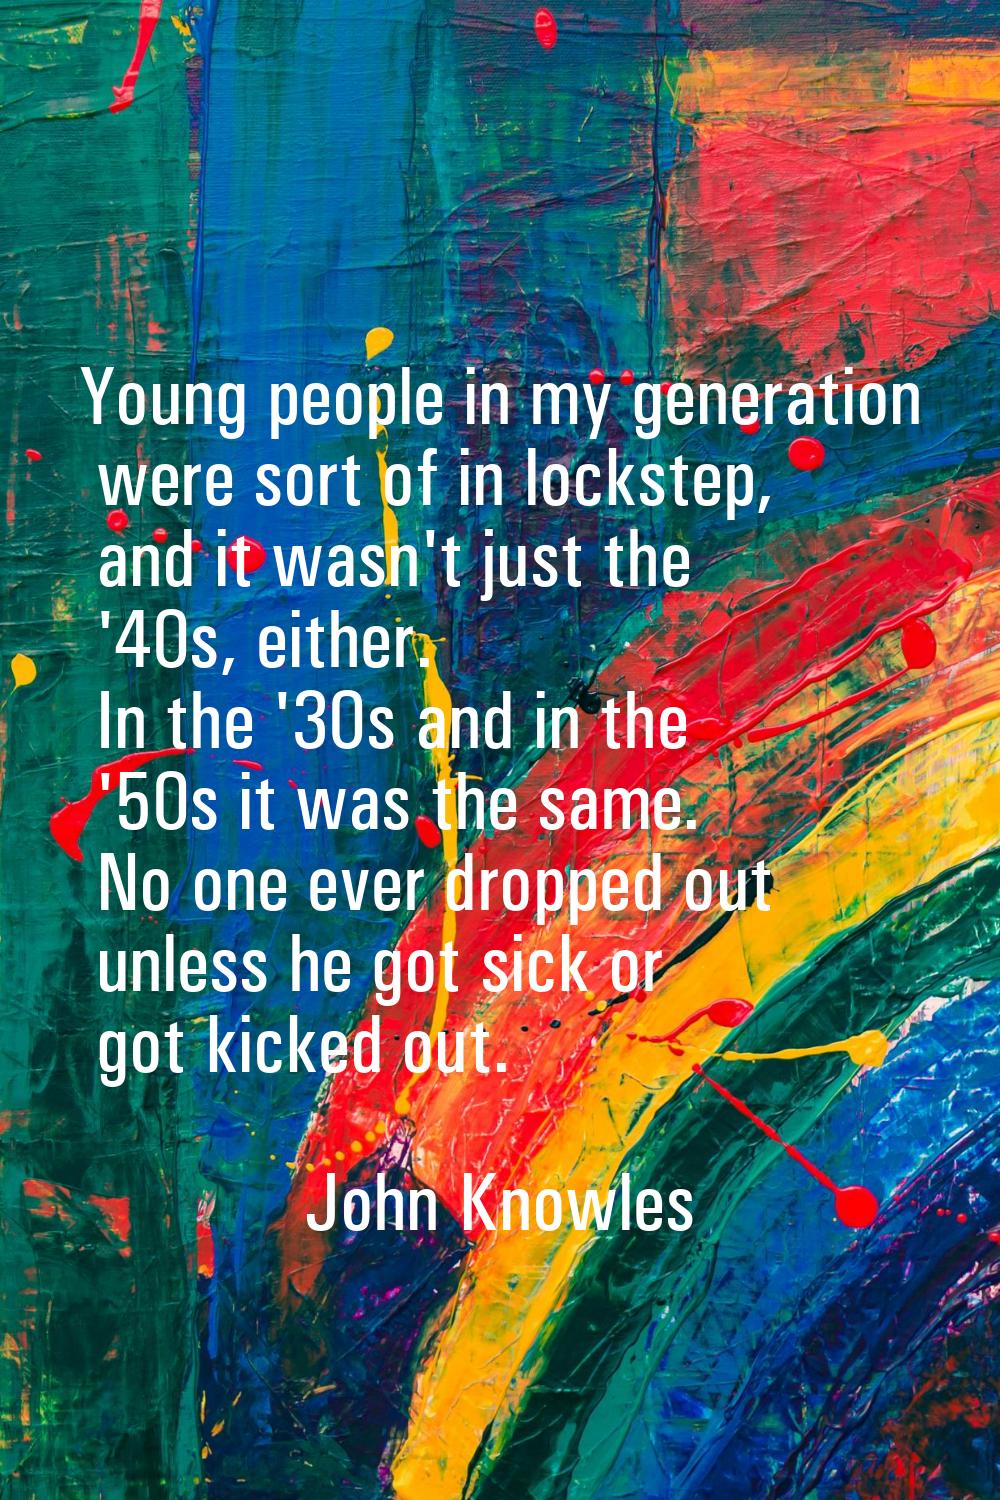 Young people in my generation were sort of in lockstep, and it wasn't just the '40s, either. In the